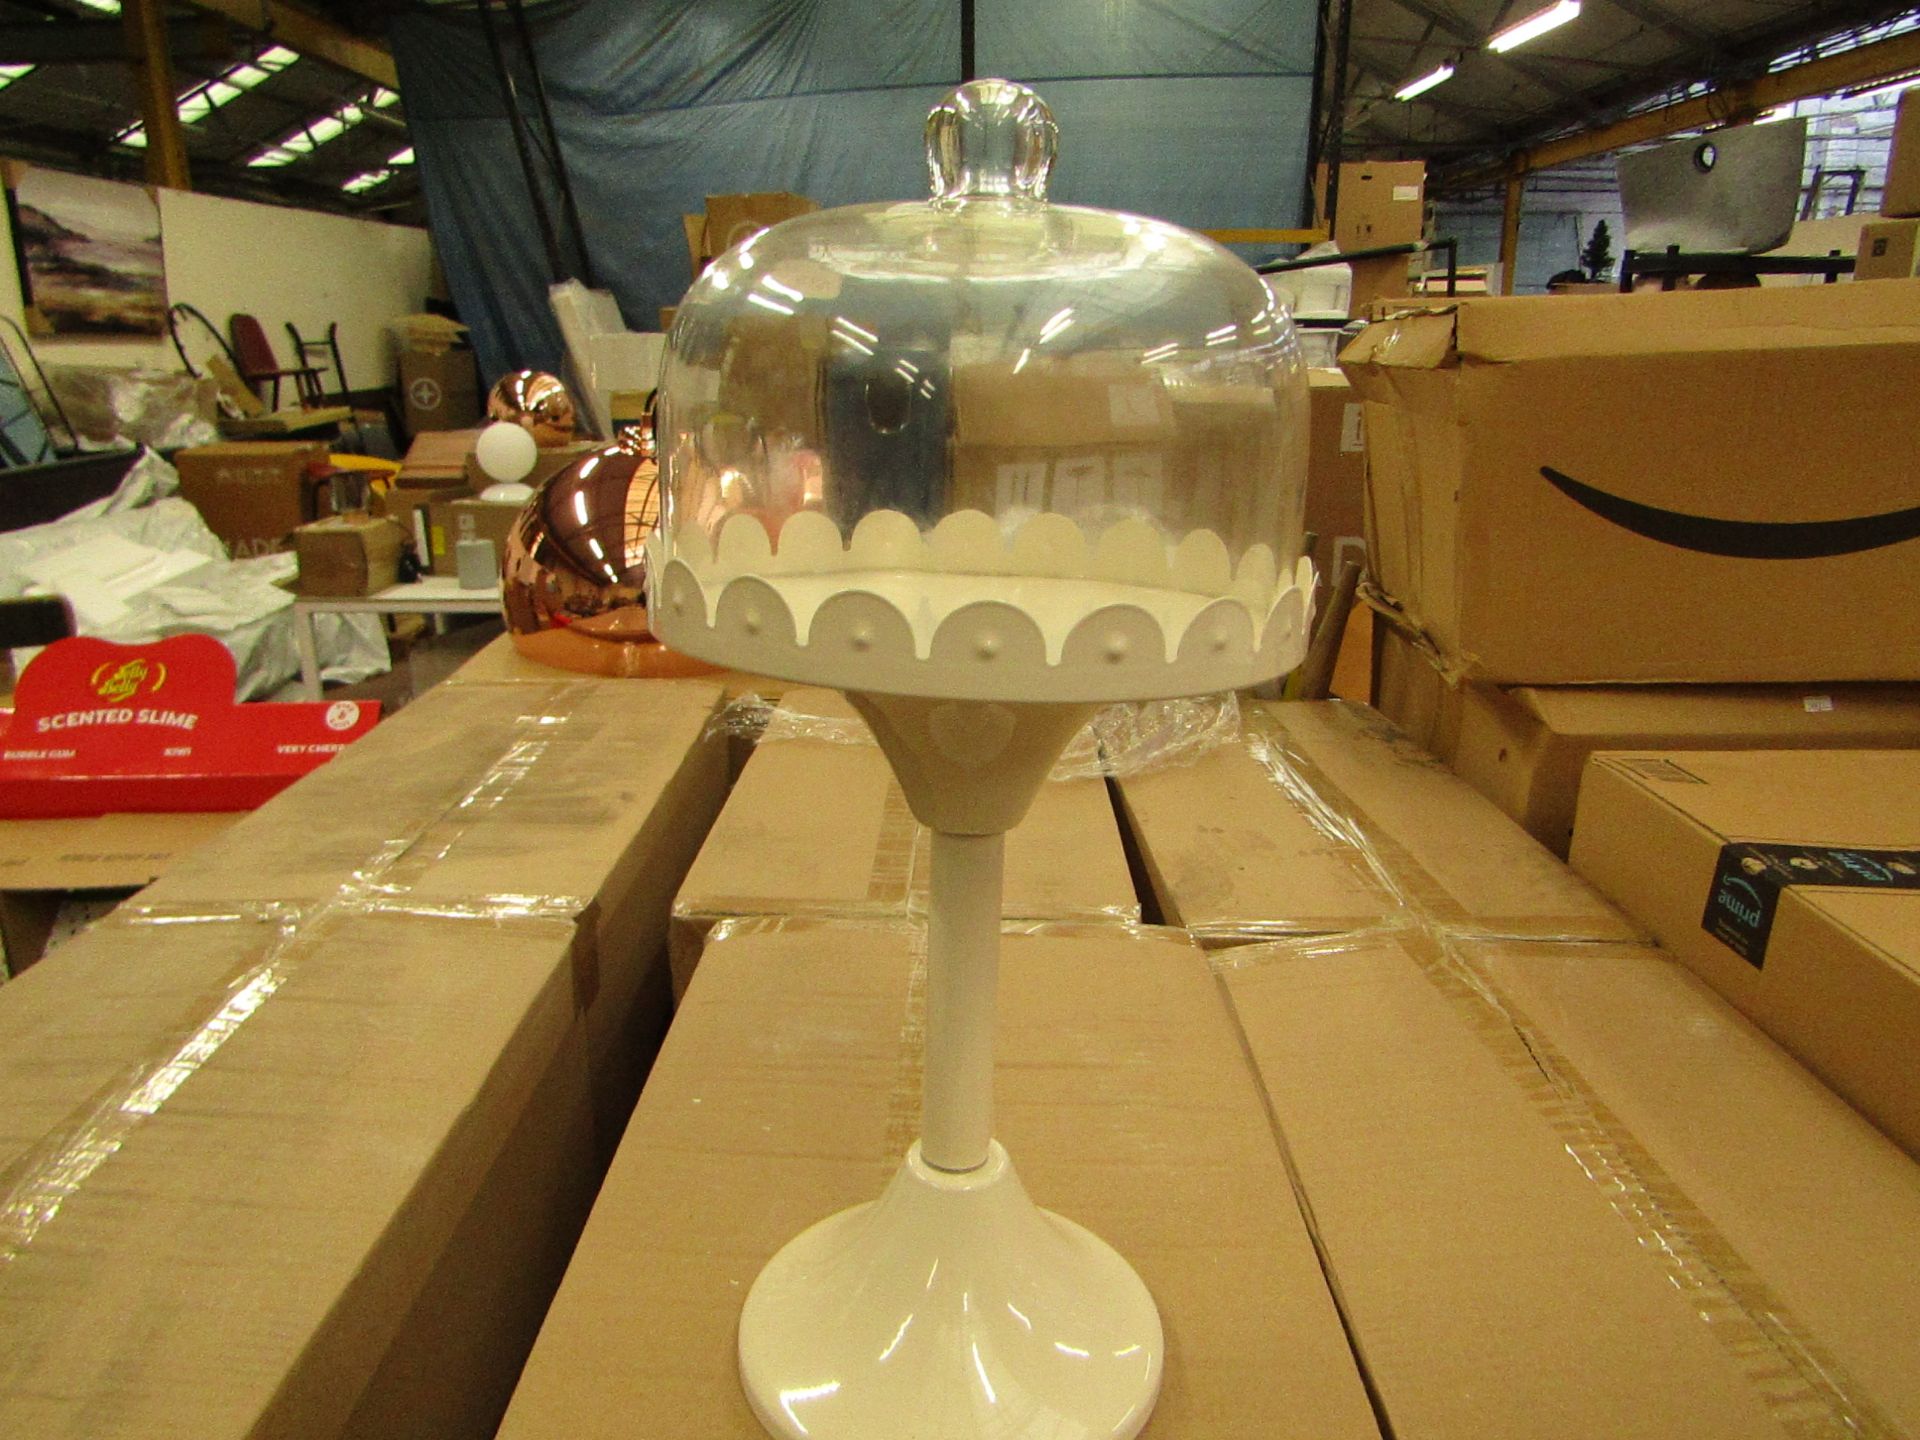 1 x GR8 Home - Cake Stand with Glass Cover - New & Boxed.